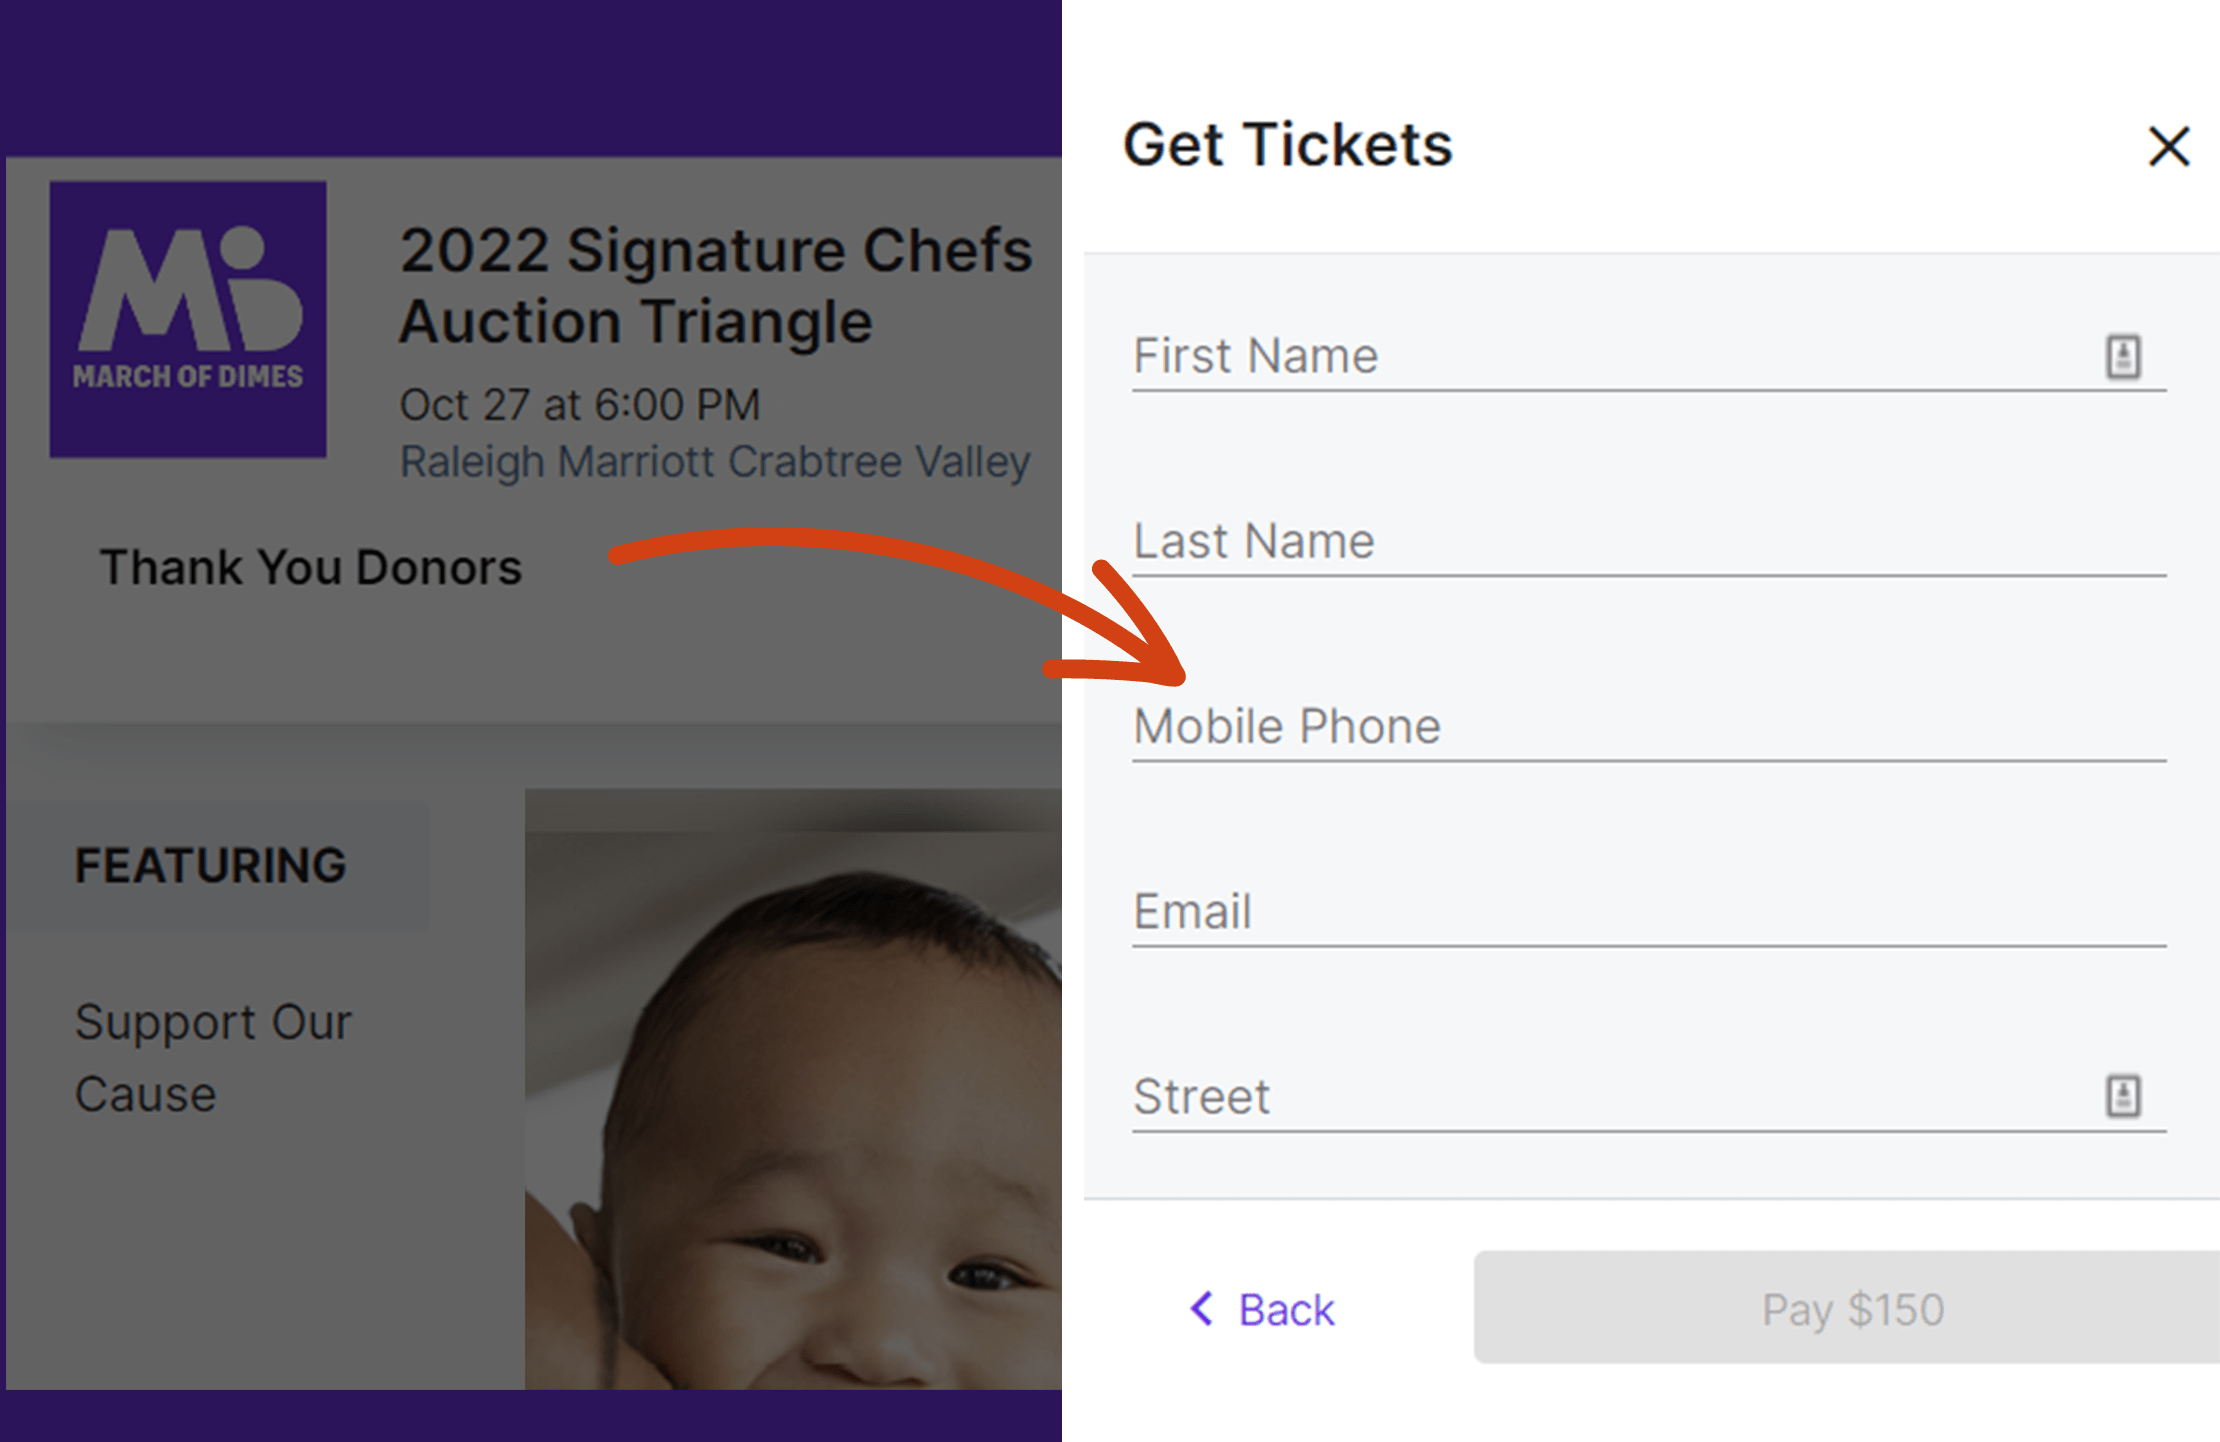 Event registration form on the March of Dimes website